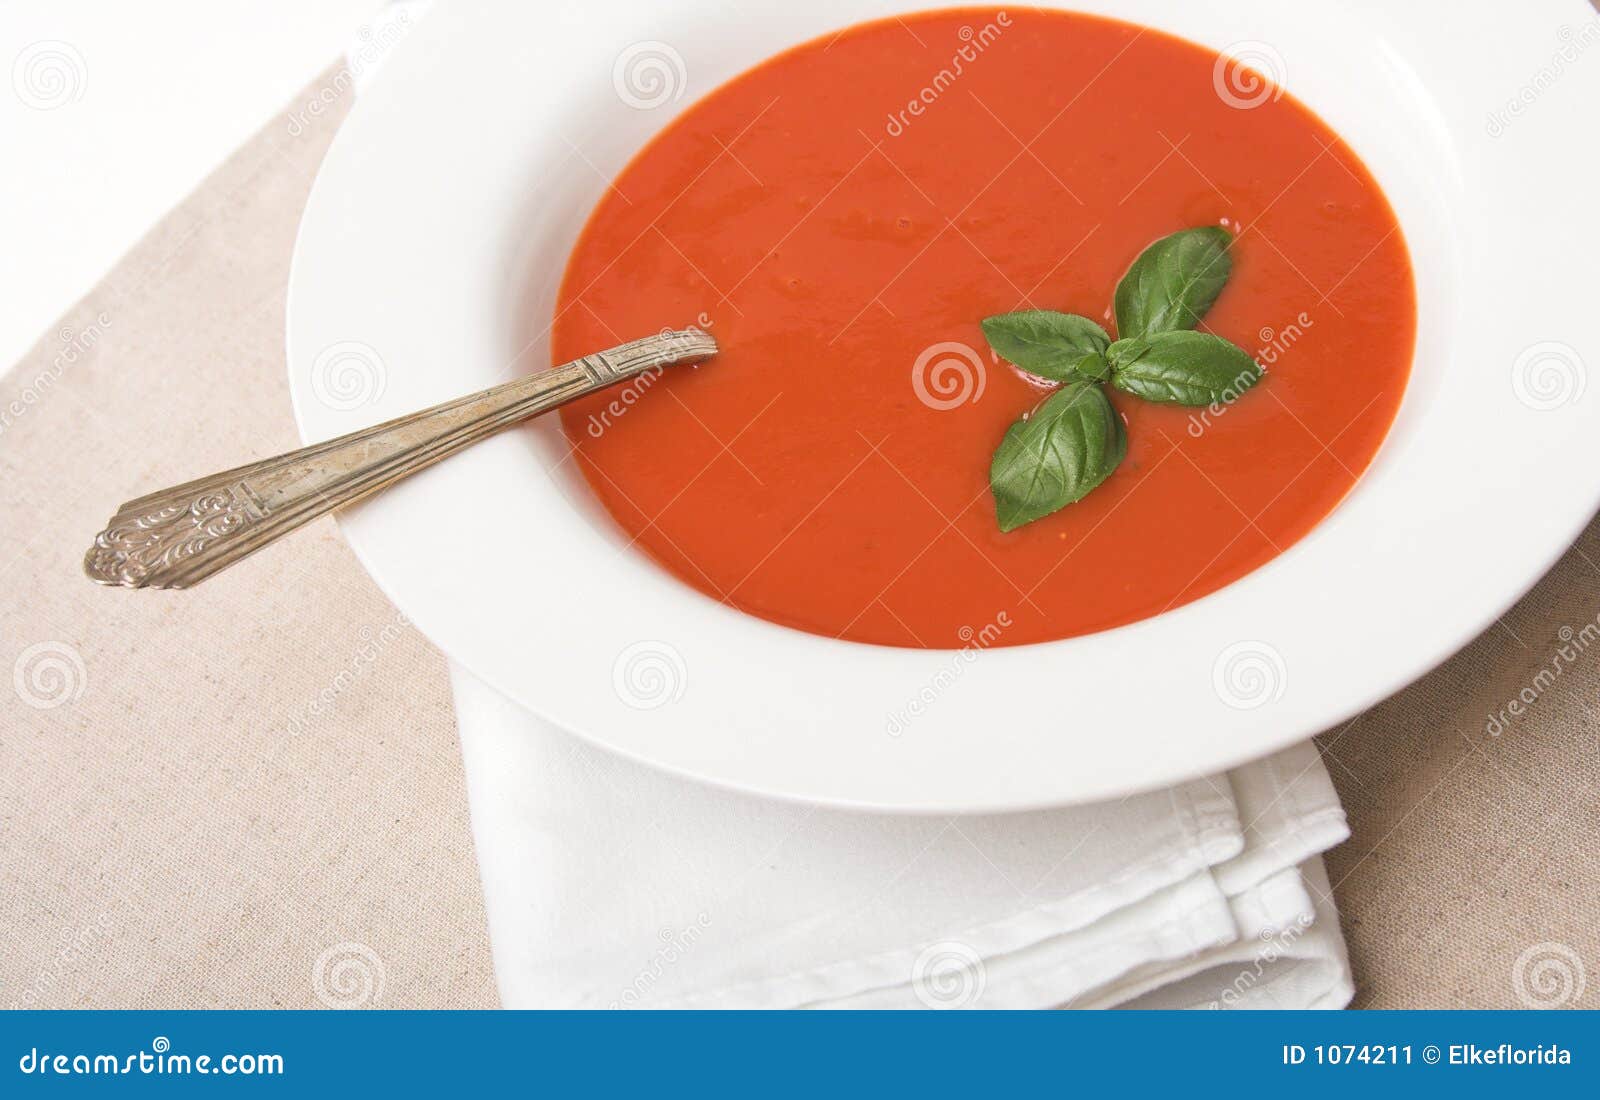 Tomato soup stock image. Image of restaurant, herb, comfort - 1074211